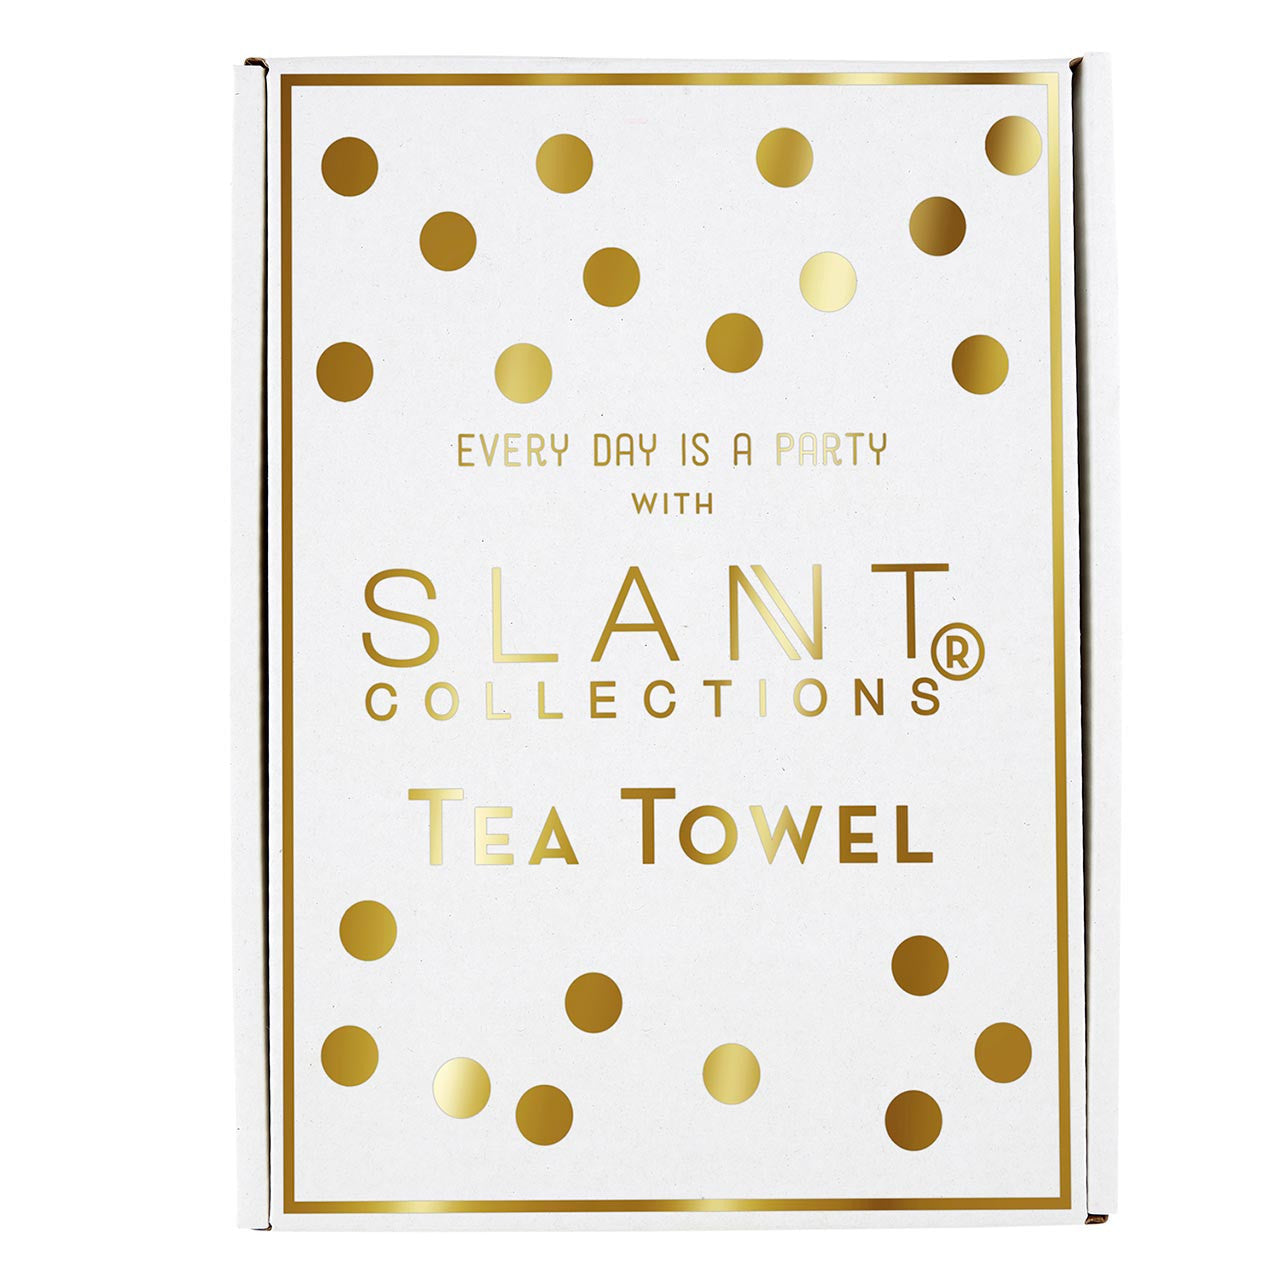 Let's Party Tea Towel in a Gift Box | Cotton Dish Hand Kitchen Towel | 20" x 27.5"